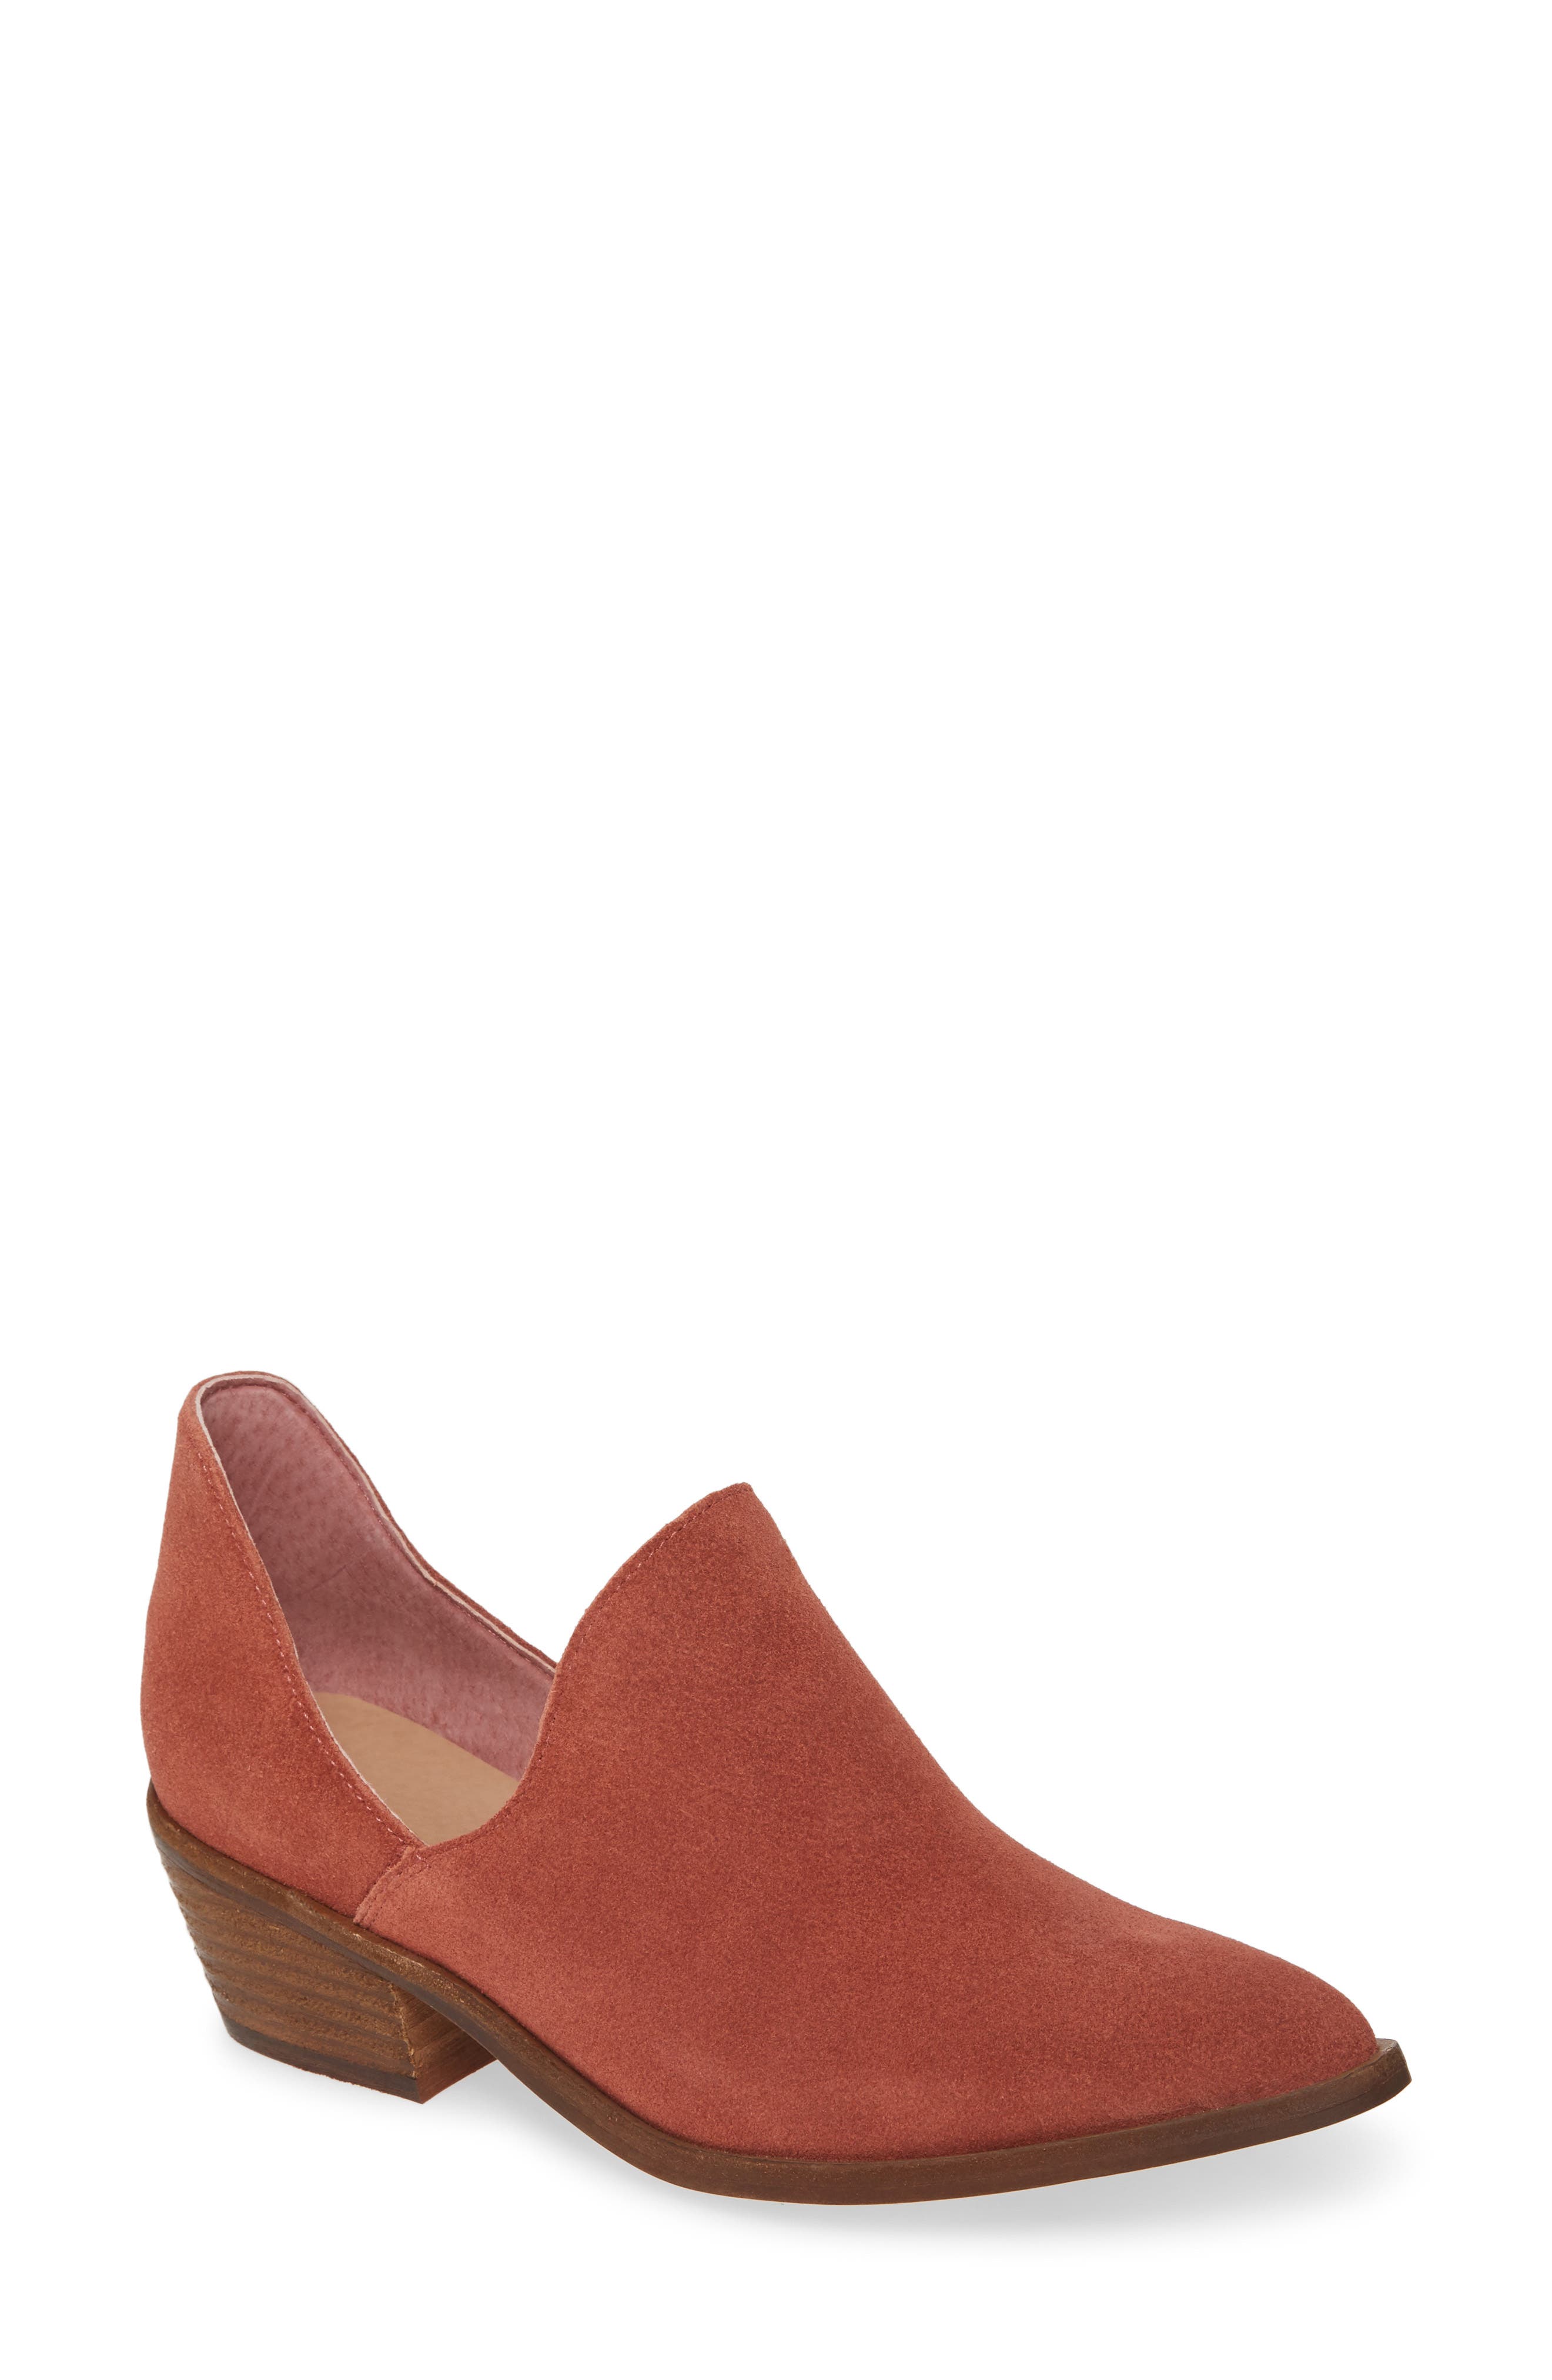 Chinese Laundry Freda Bootie In Rhubarb